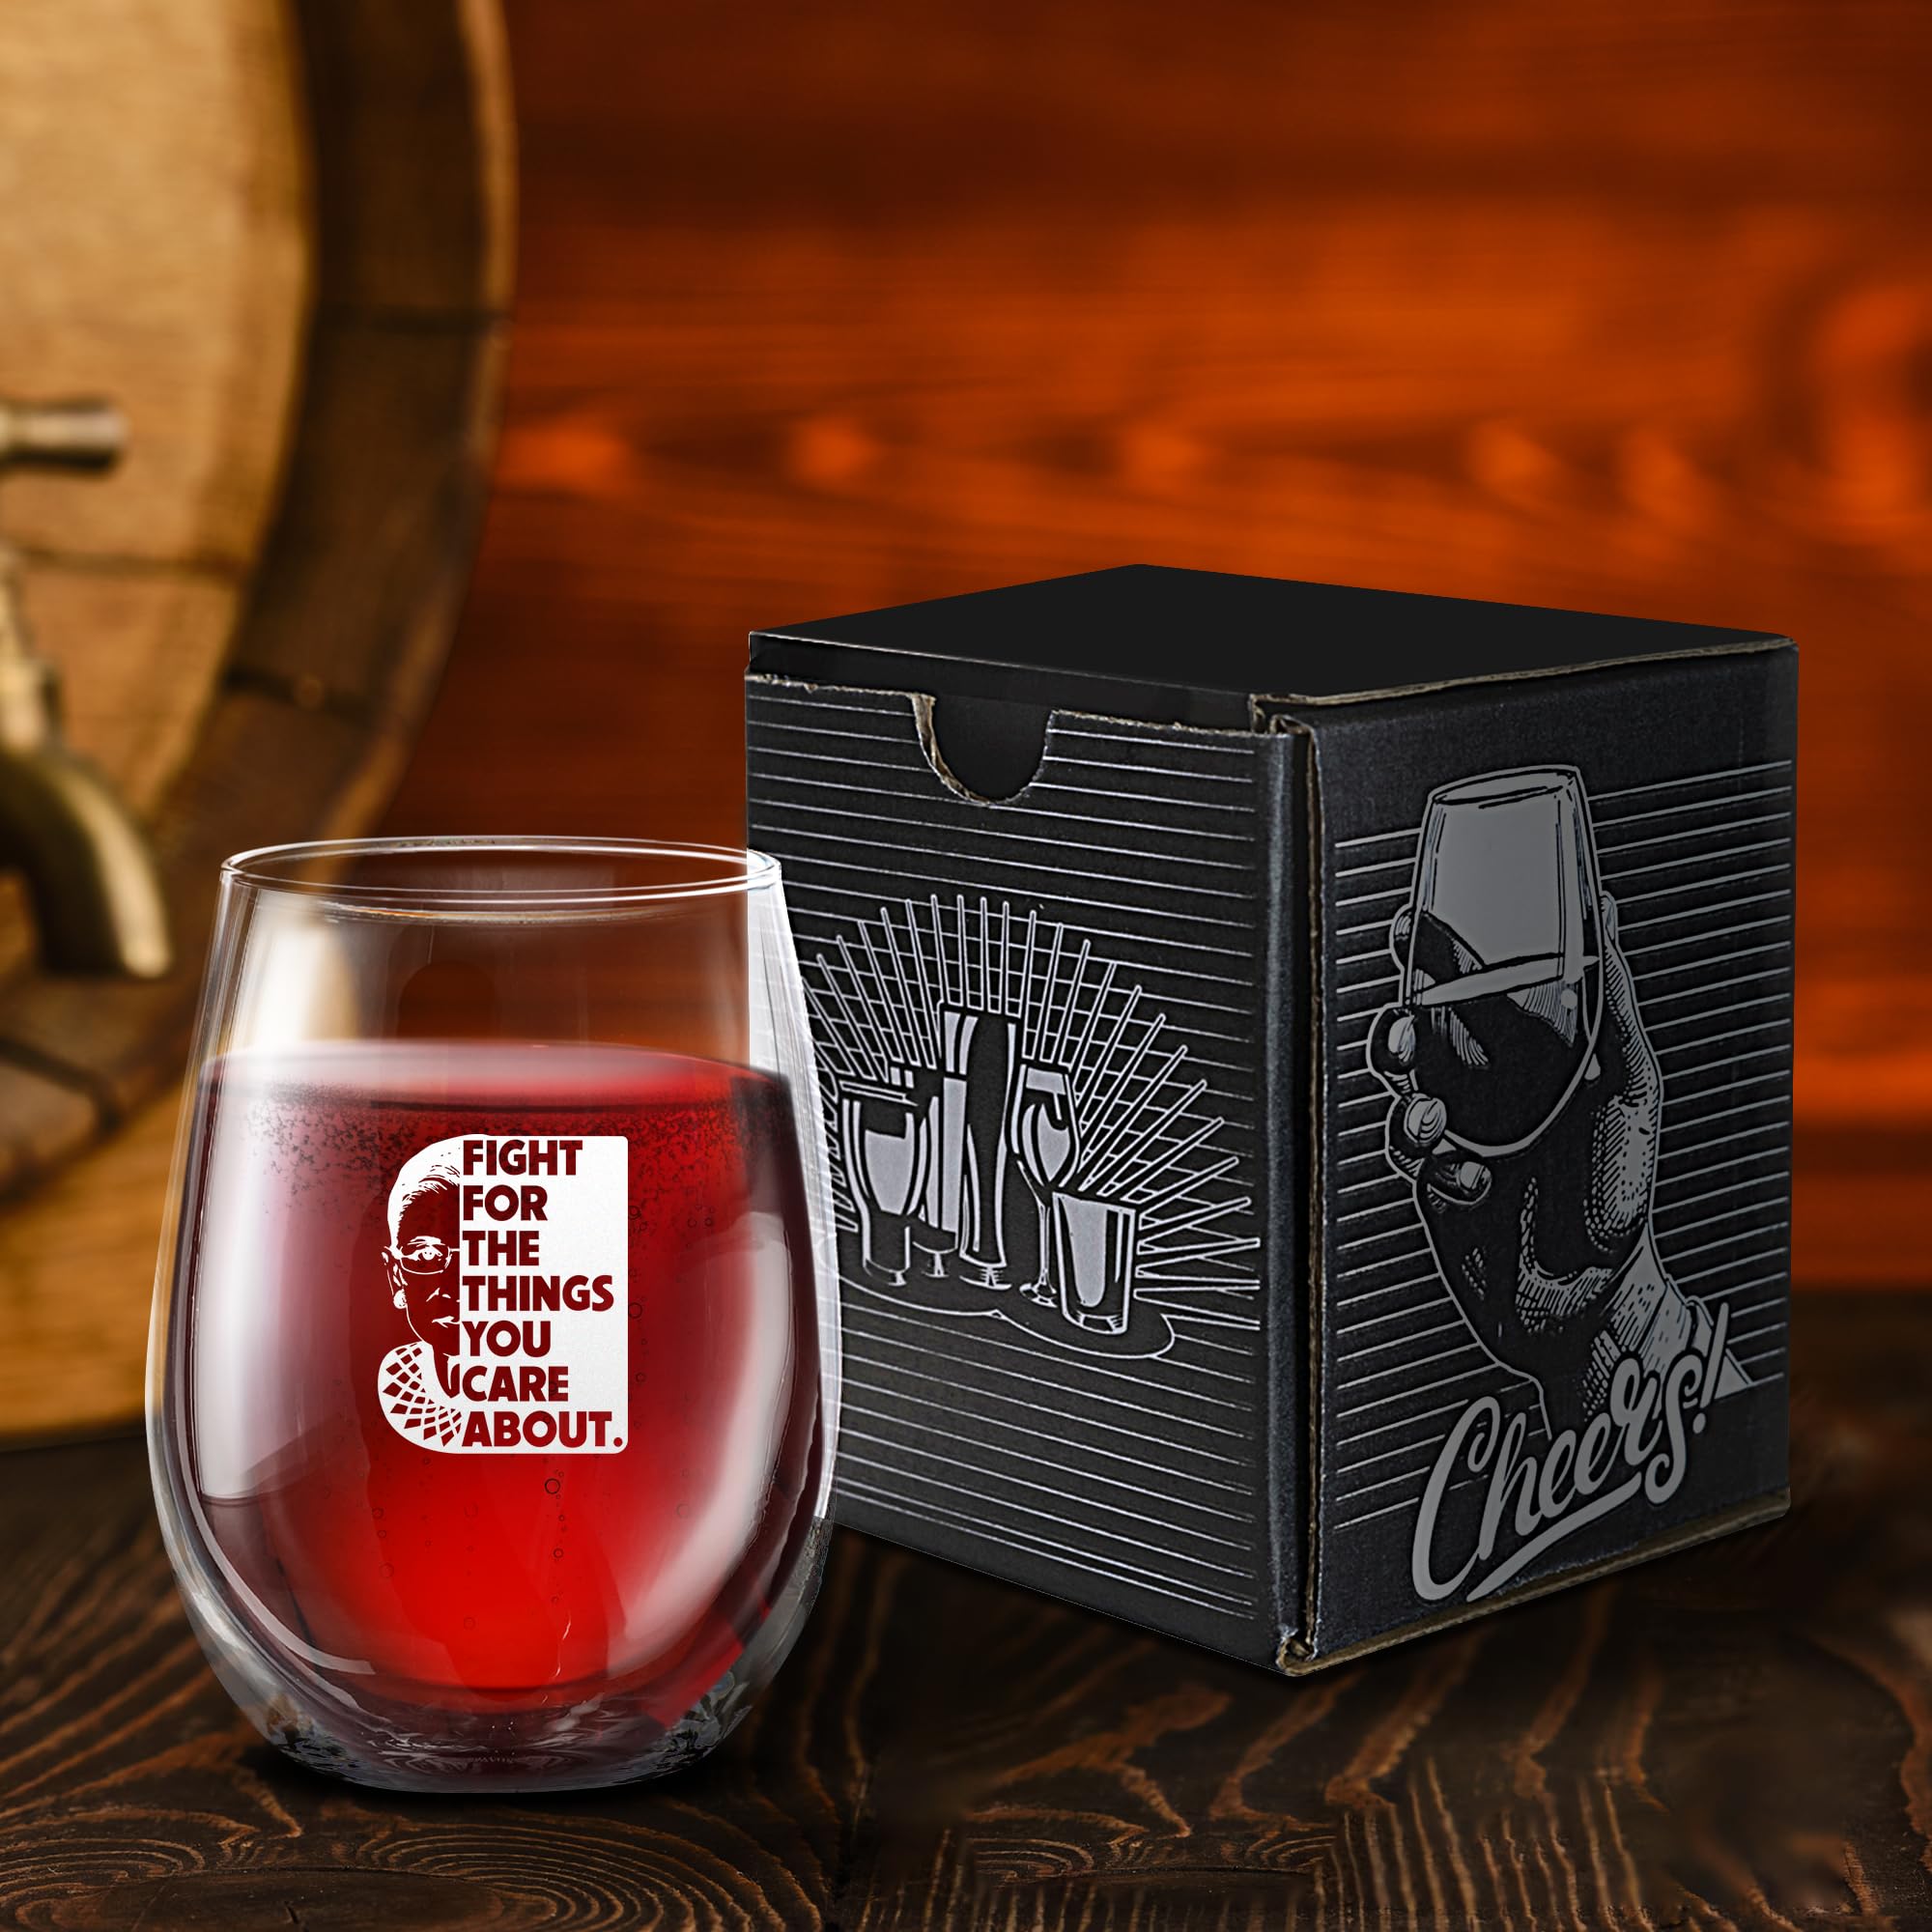 DEMS for USA RBG WINE GLASS | Ruth Bader Ginsburg | FIGHT FOR THE THINGS YOU CARE ABOUT | 15oz Stemless Wine Tumbler | MADE IN USA, 2M103-2C-574